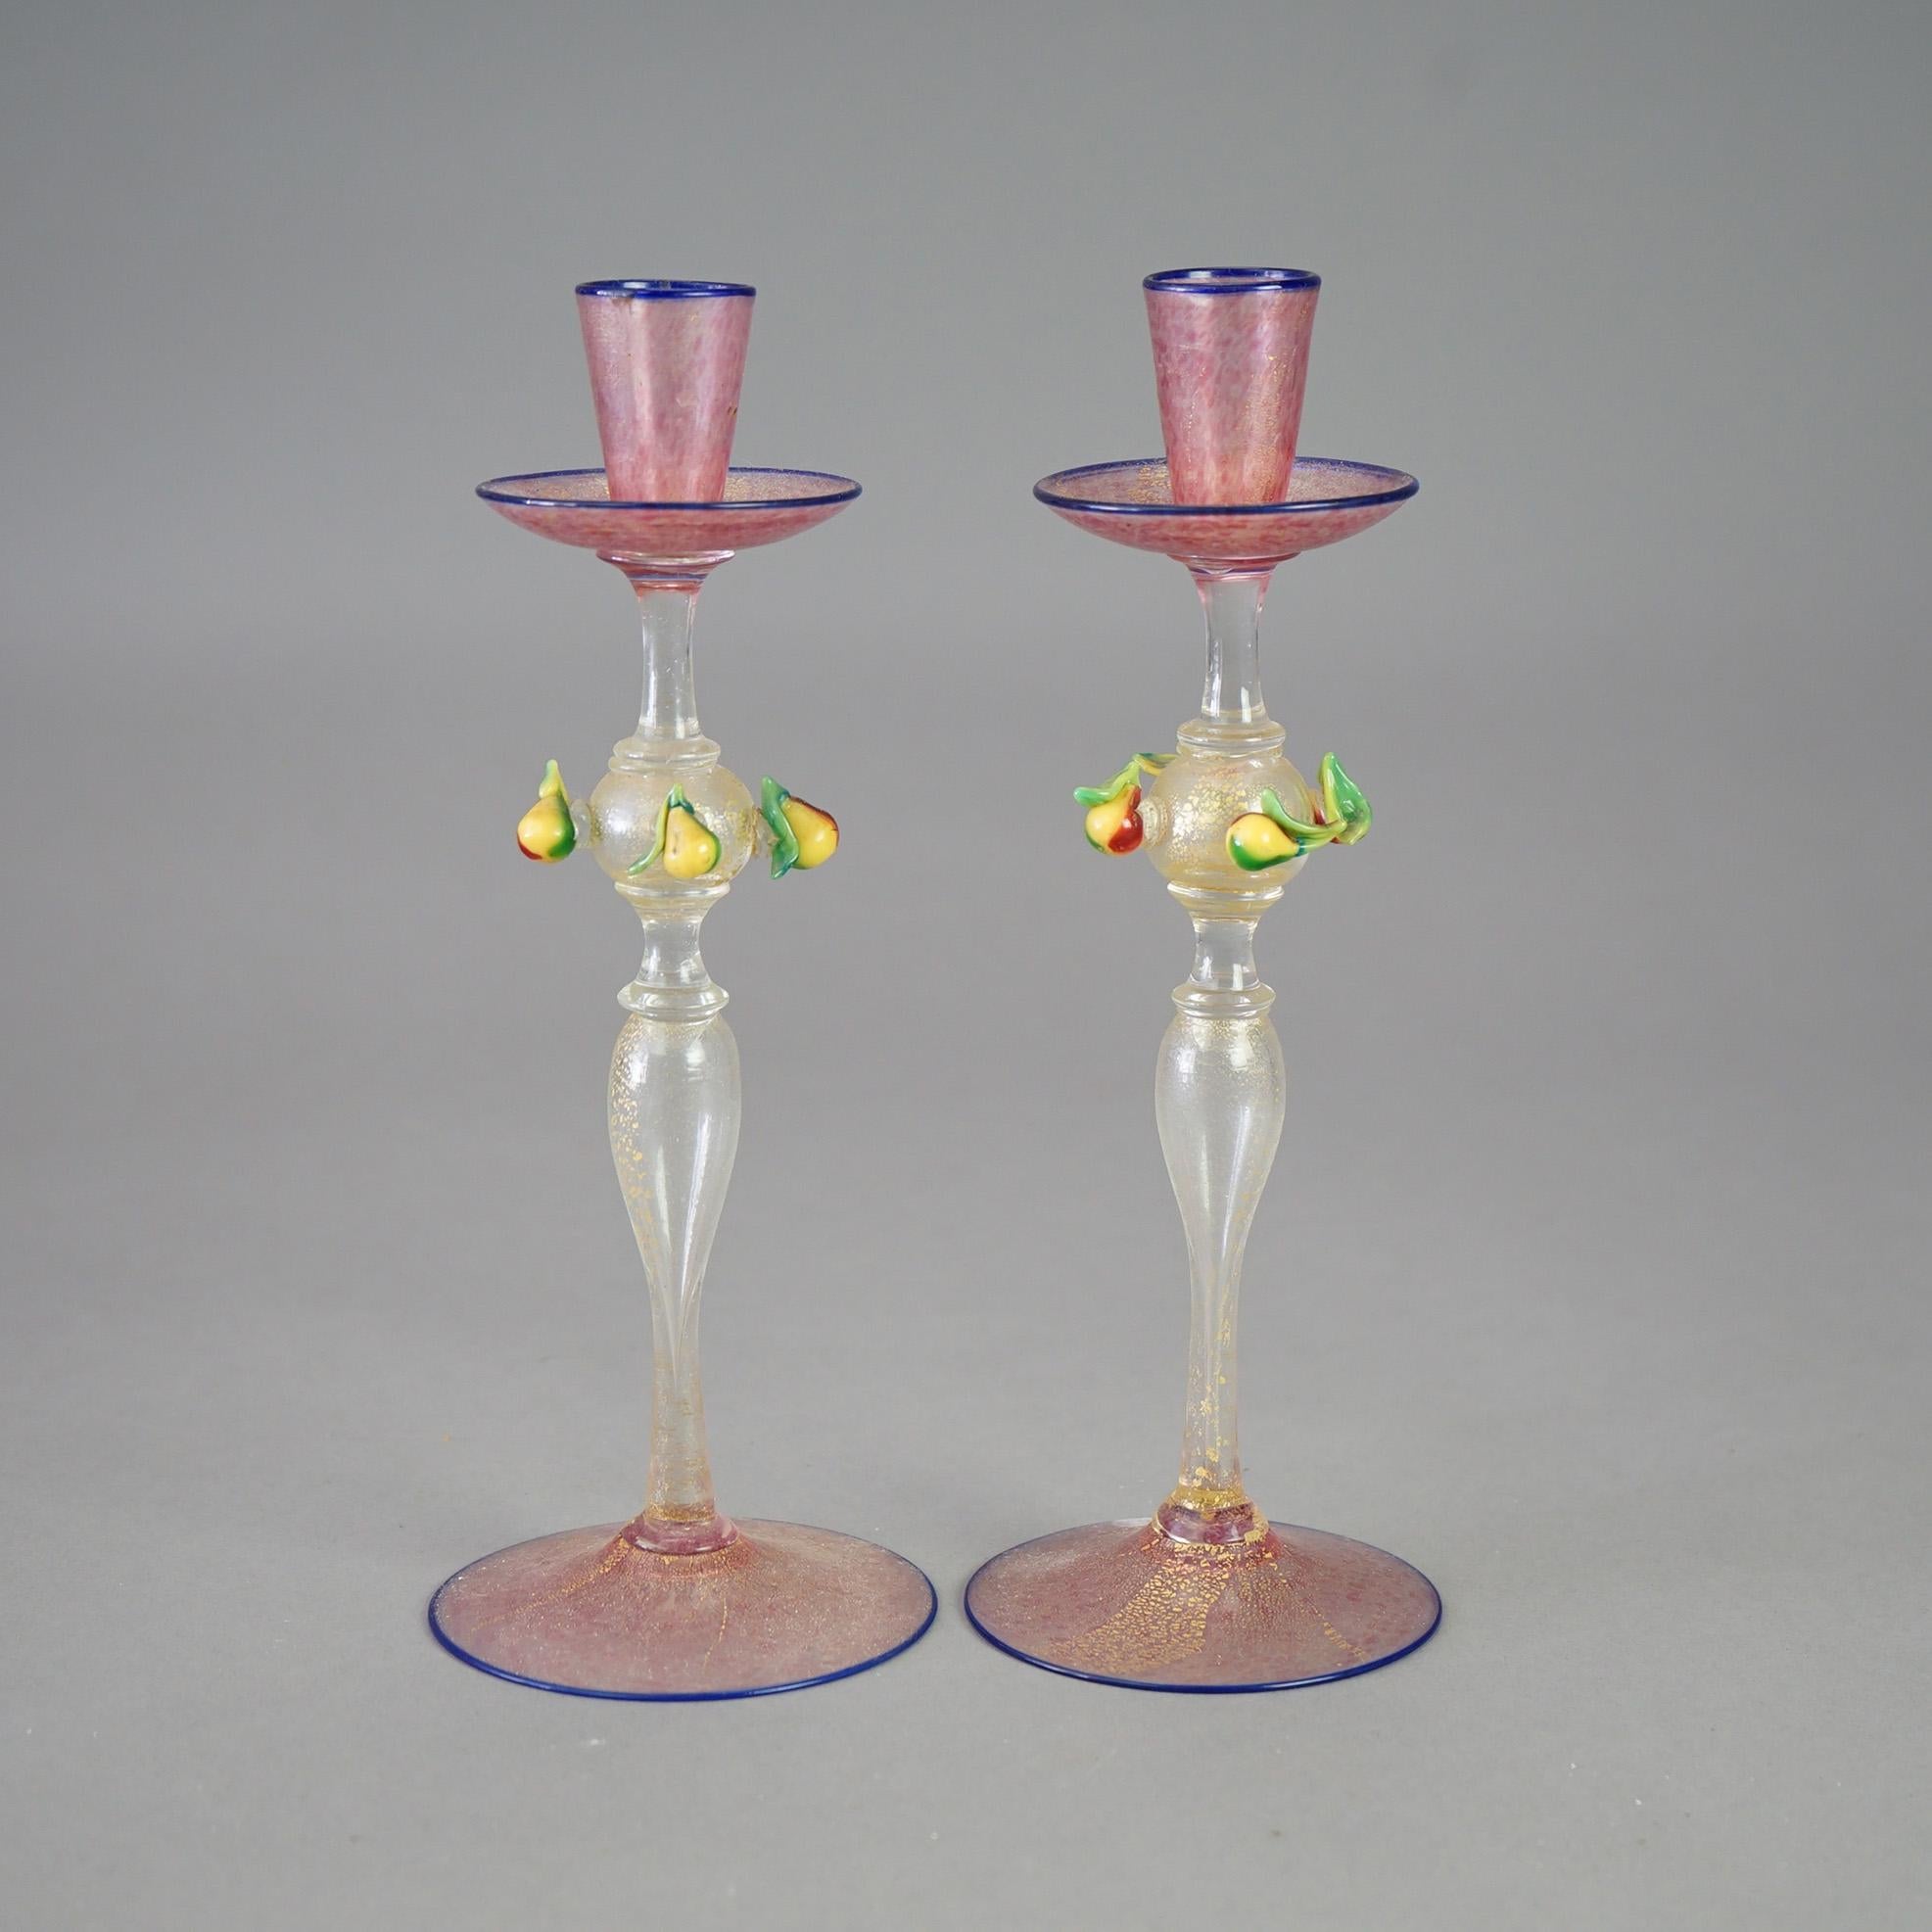 Hand-Crafted Antique Pair of Venetian Murano Art Glass Candlesticks with Pears Circa 1920 For Sale